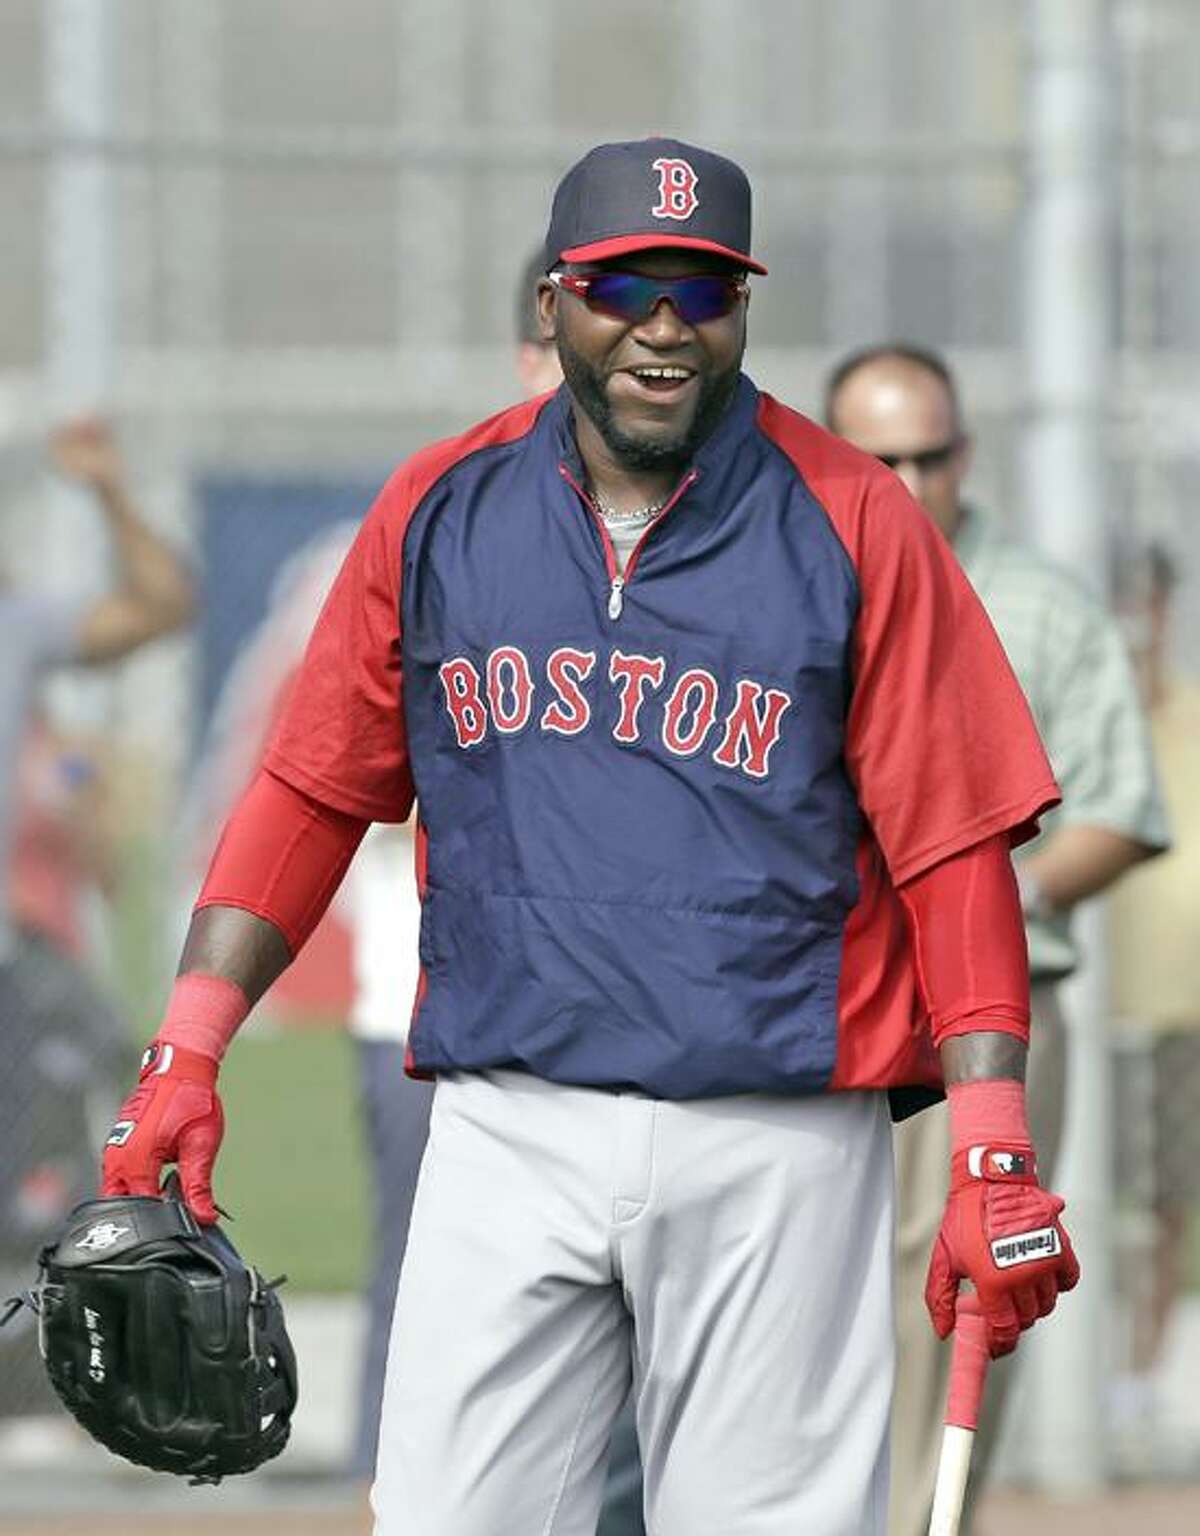 Boston Red sox designated hitter David Ortiz during spring training Wednesday, Feb. 13, 2013, in Fort Myers, Fla. (AP Photo/Chris O'Meara)